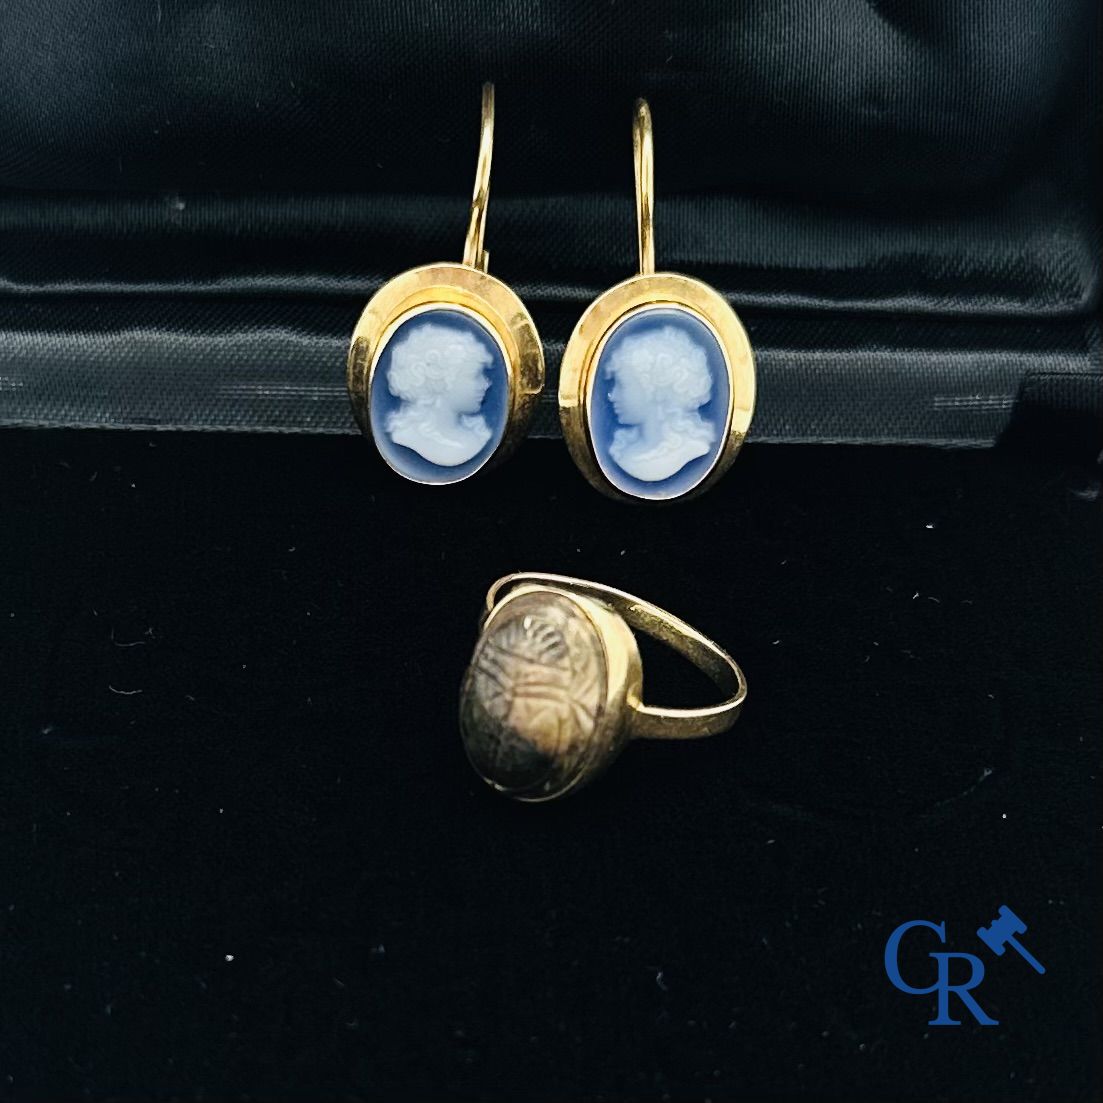 Jewellery: Lot consisting of a ring in gold 18K and a pair of earrings in gold 18K.